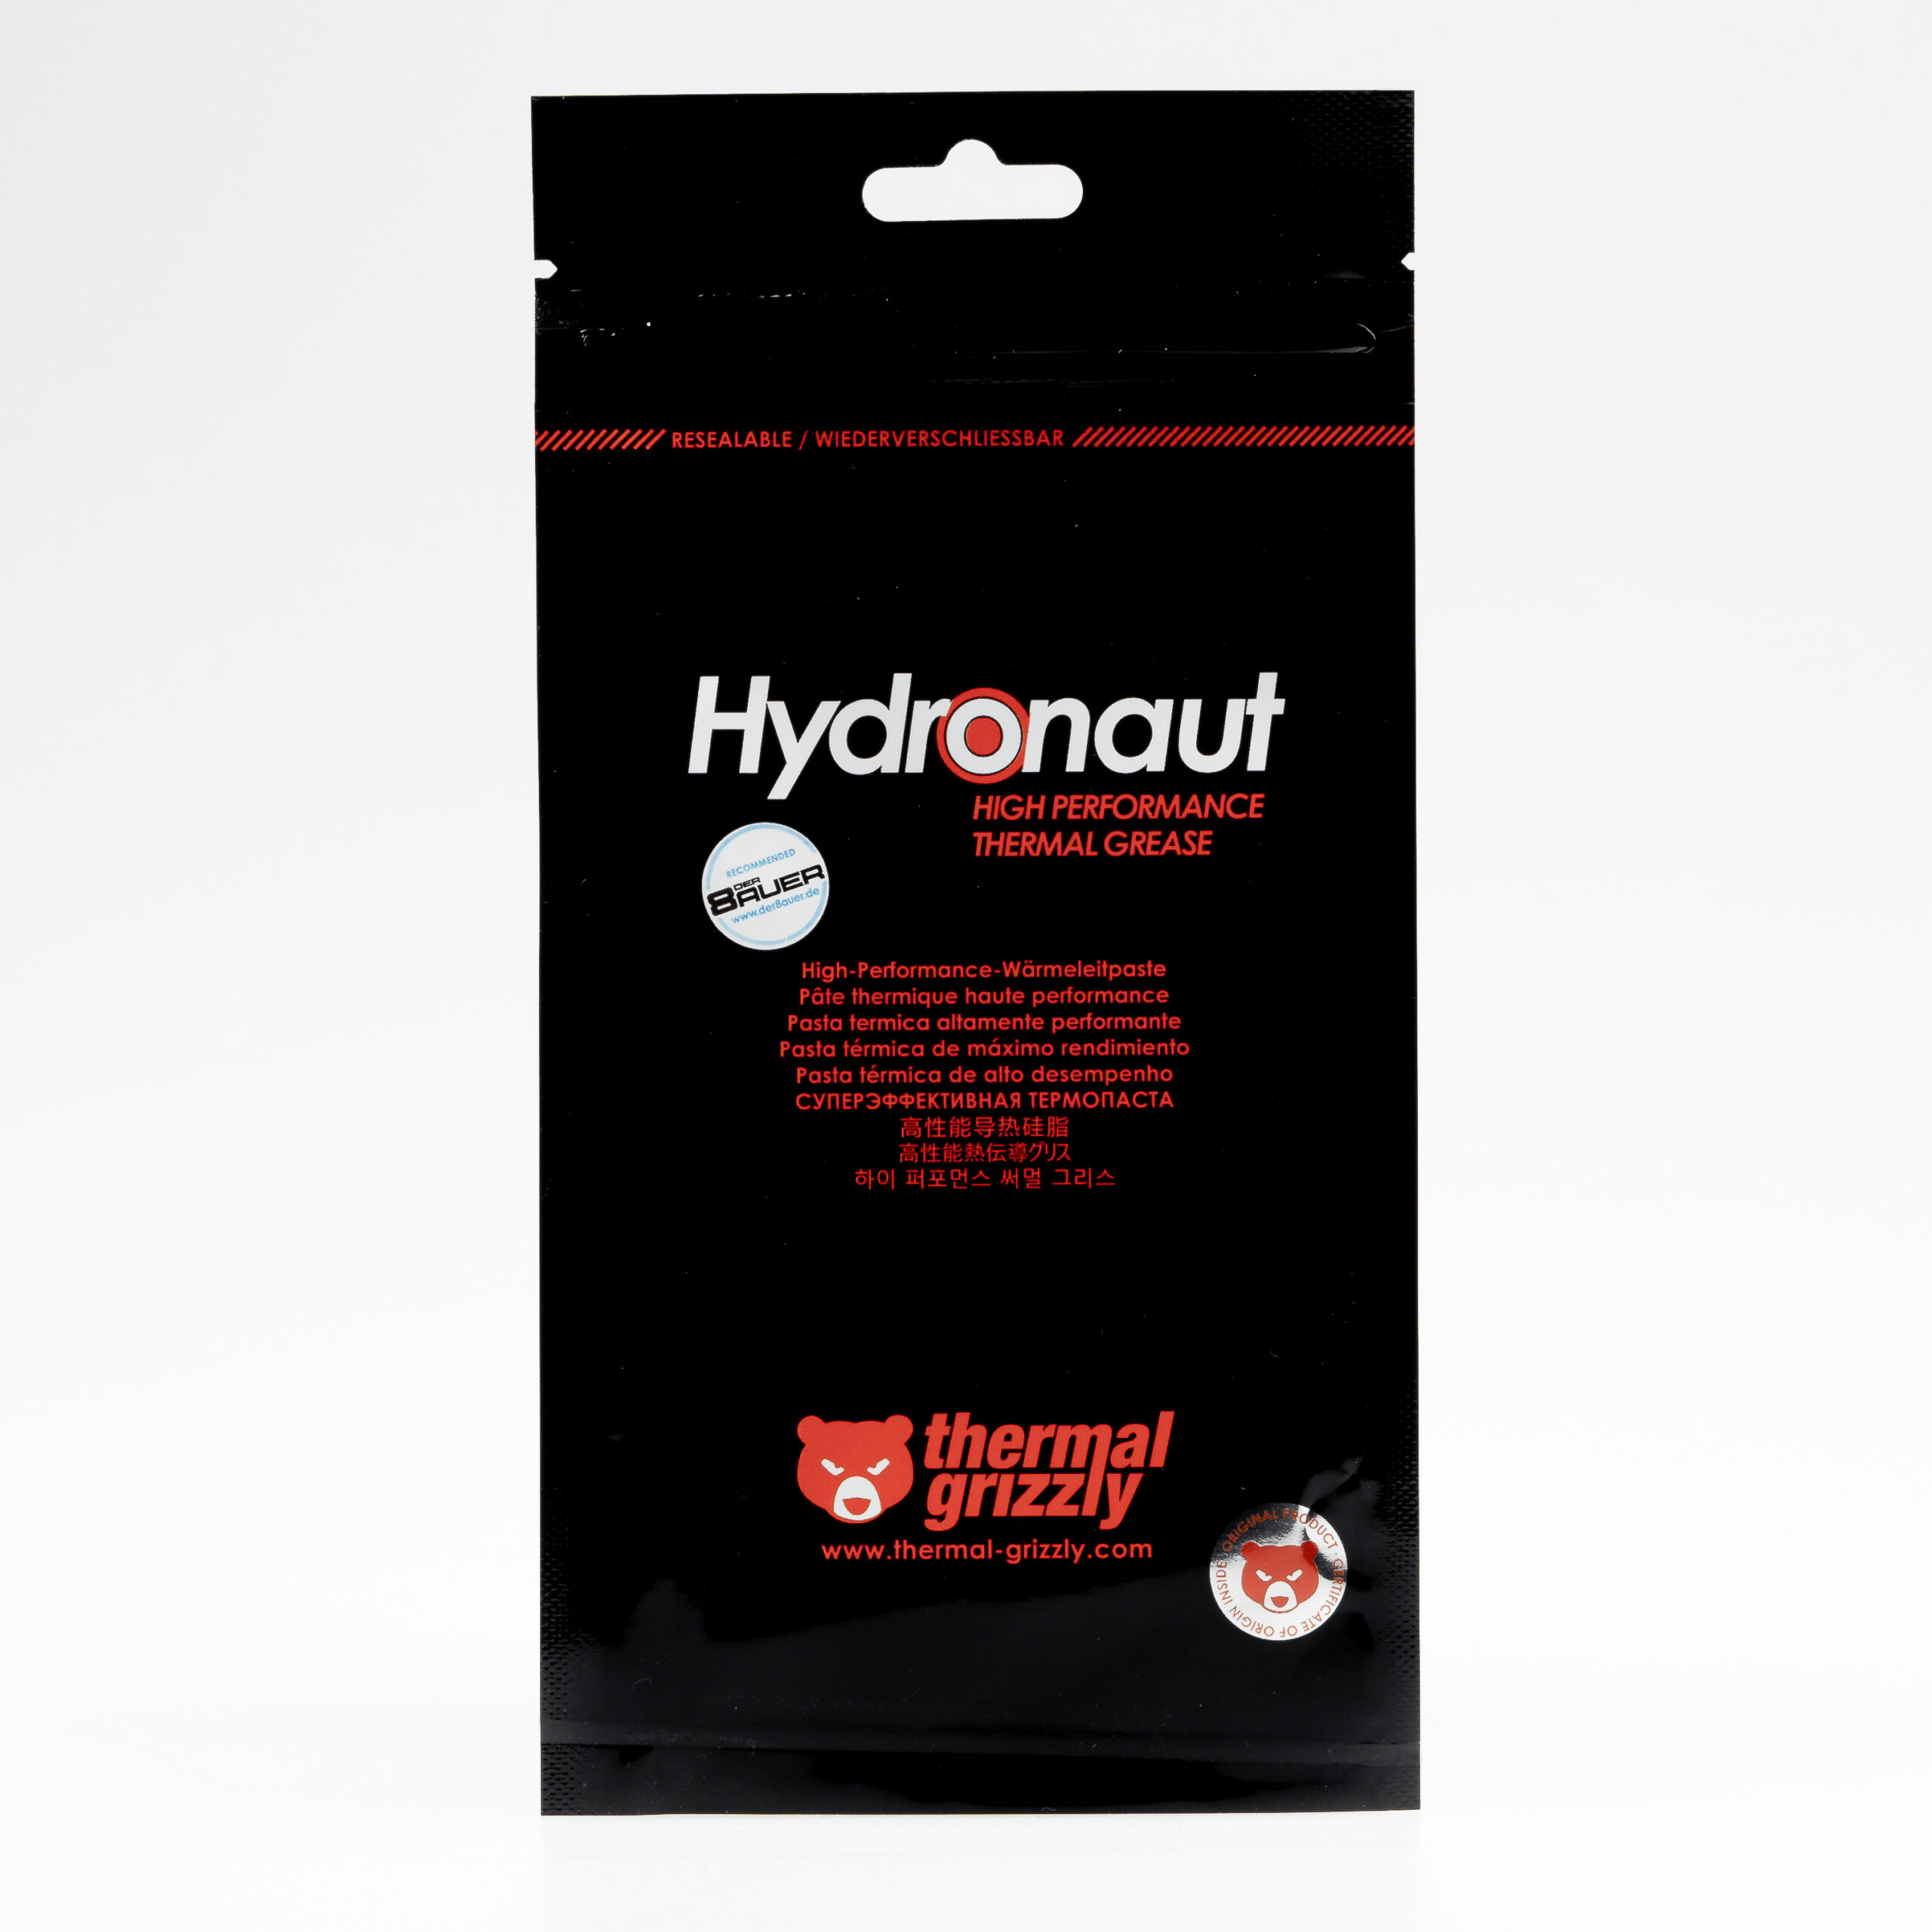 Thermal Grizzly Hydronaut Thermal Paste, 26g